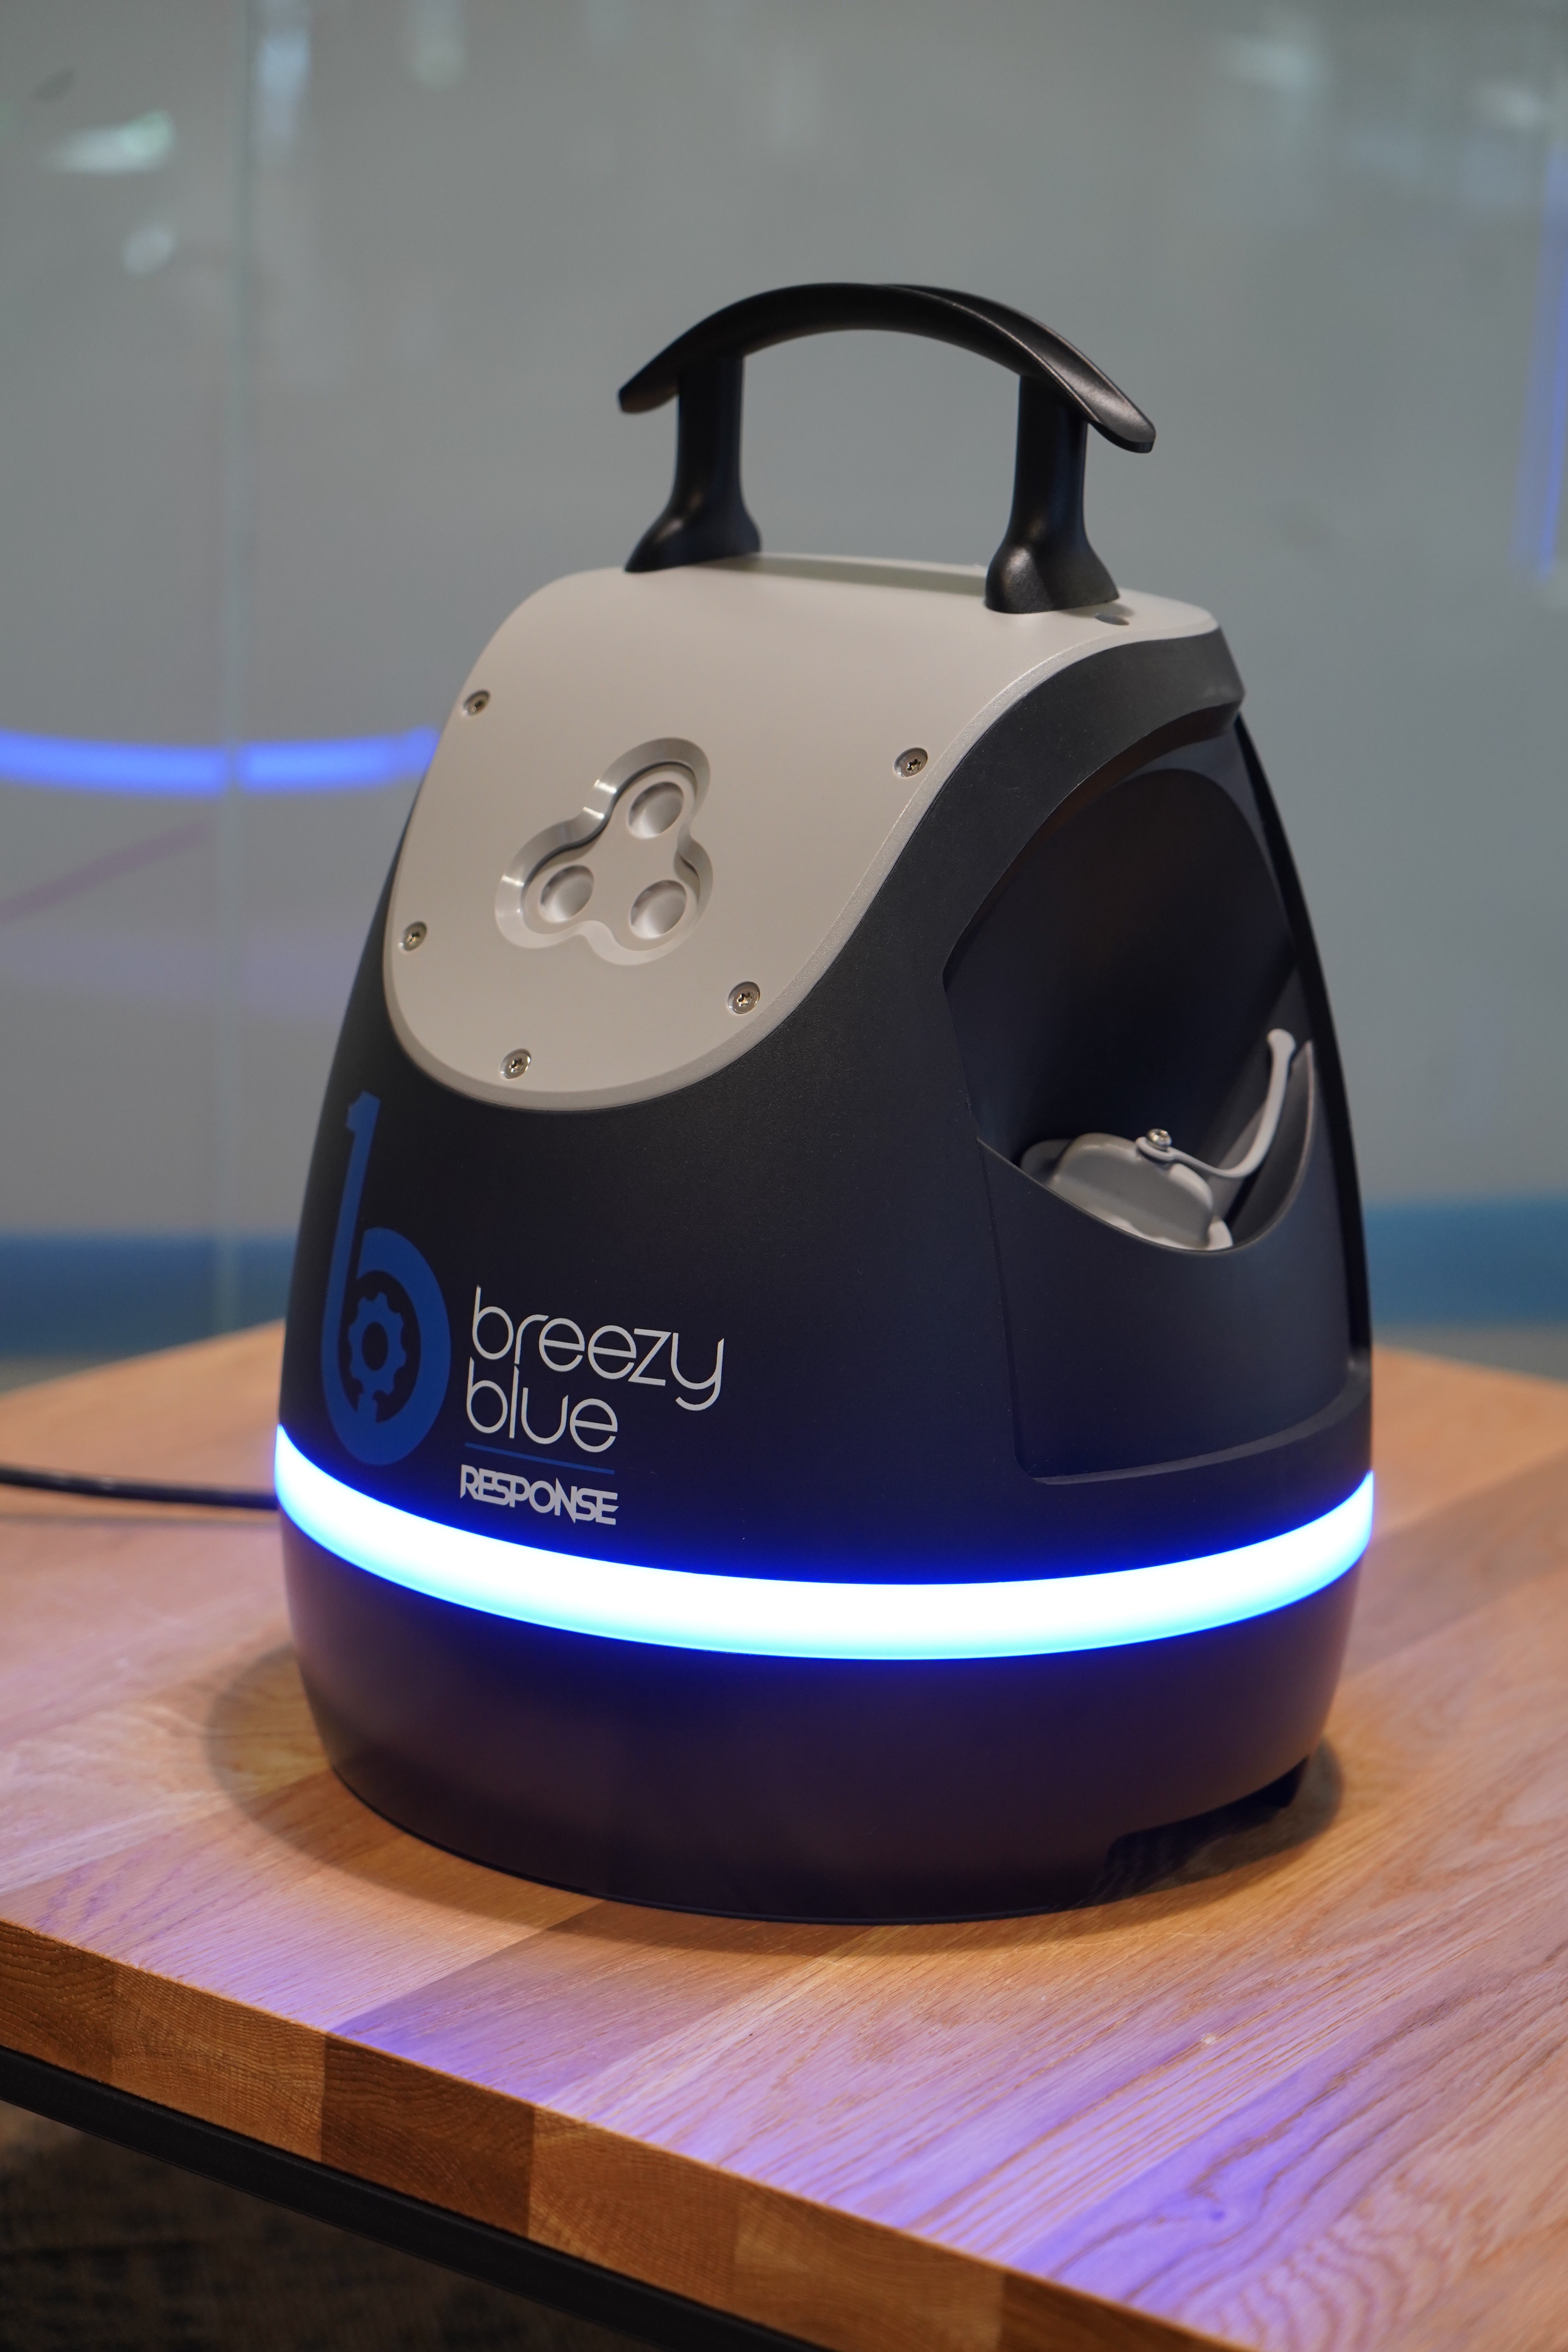 Build With Robots Expands With Breezy Blue